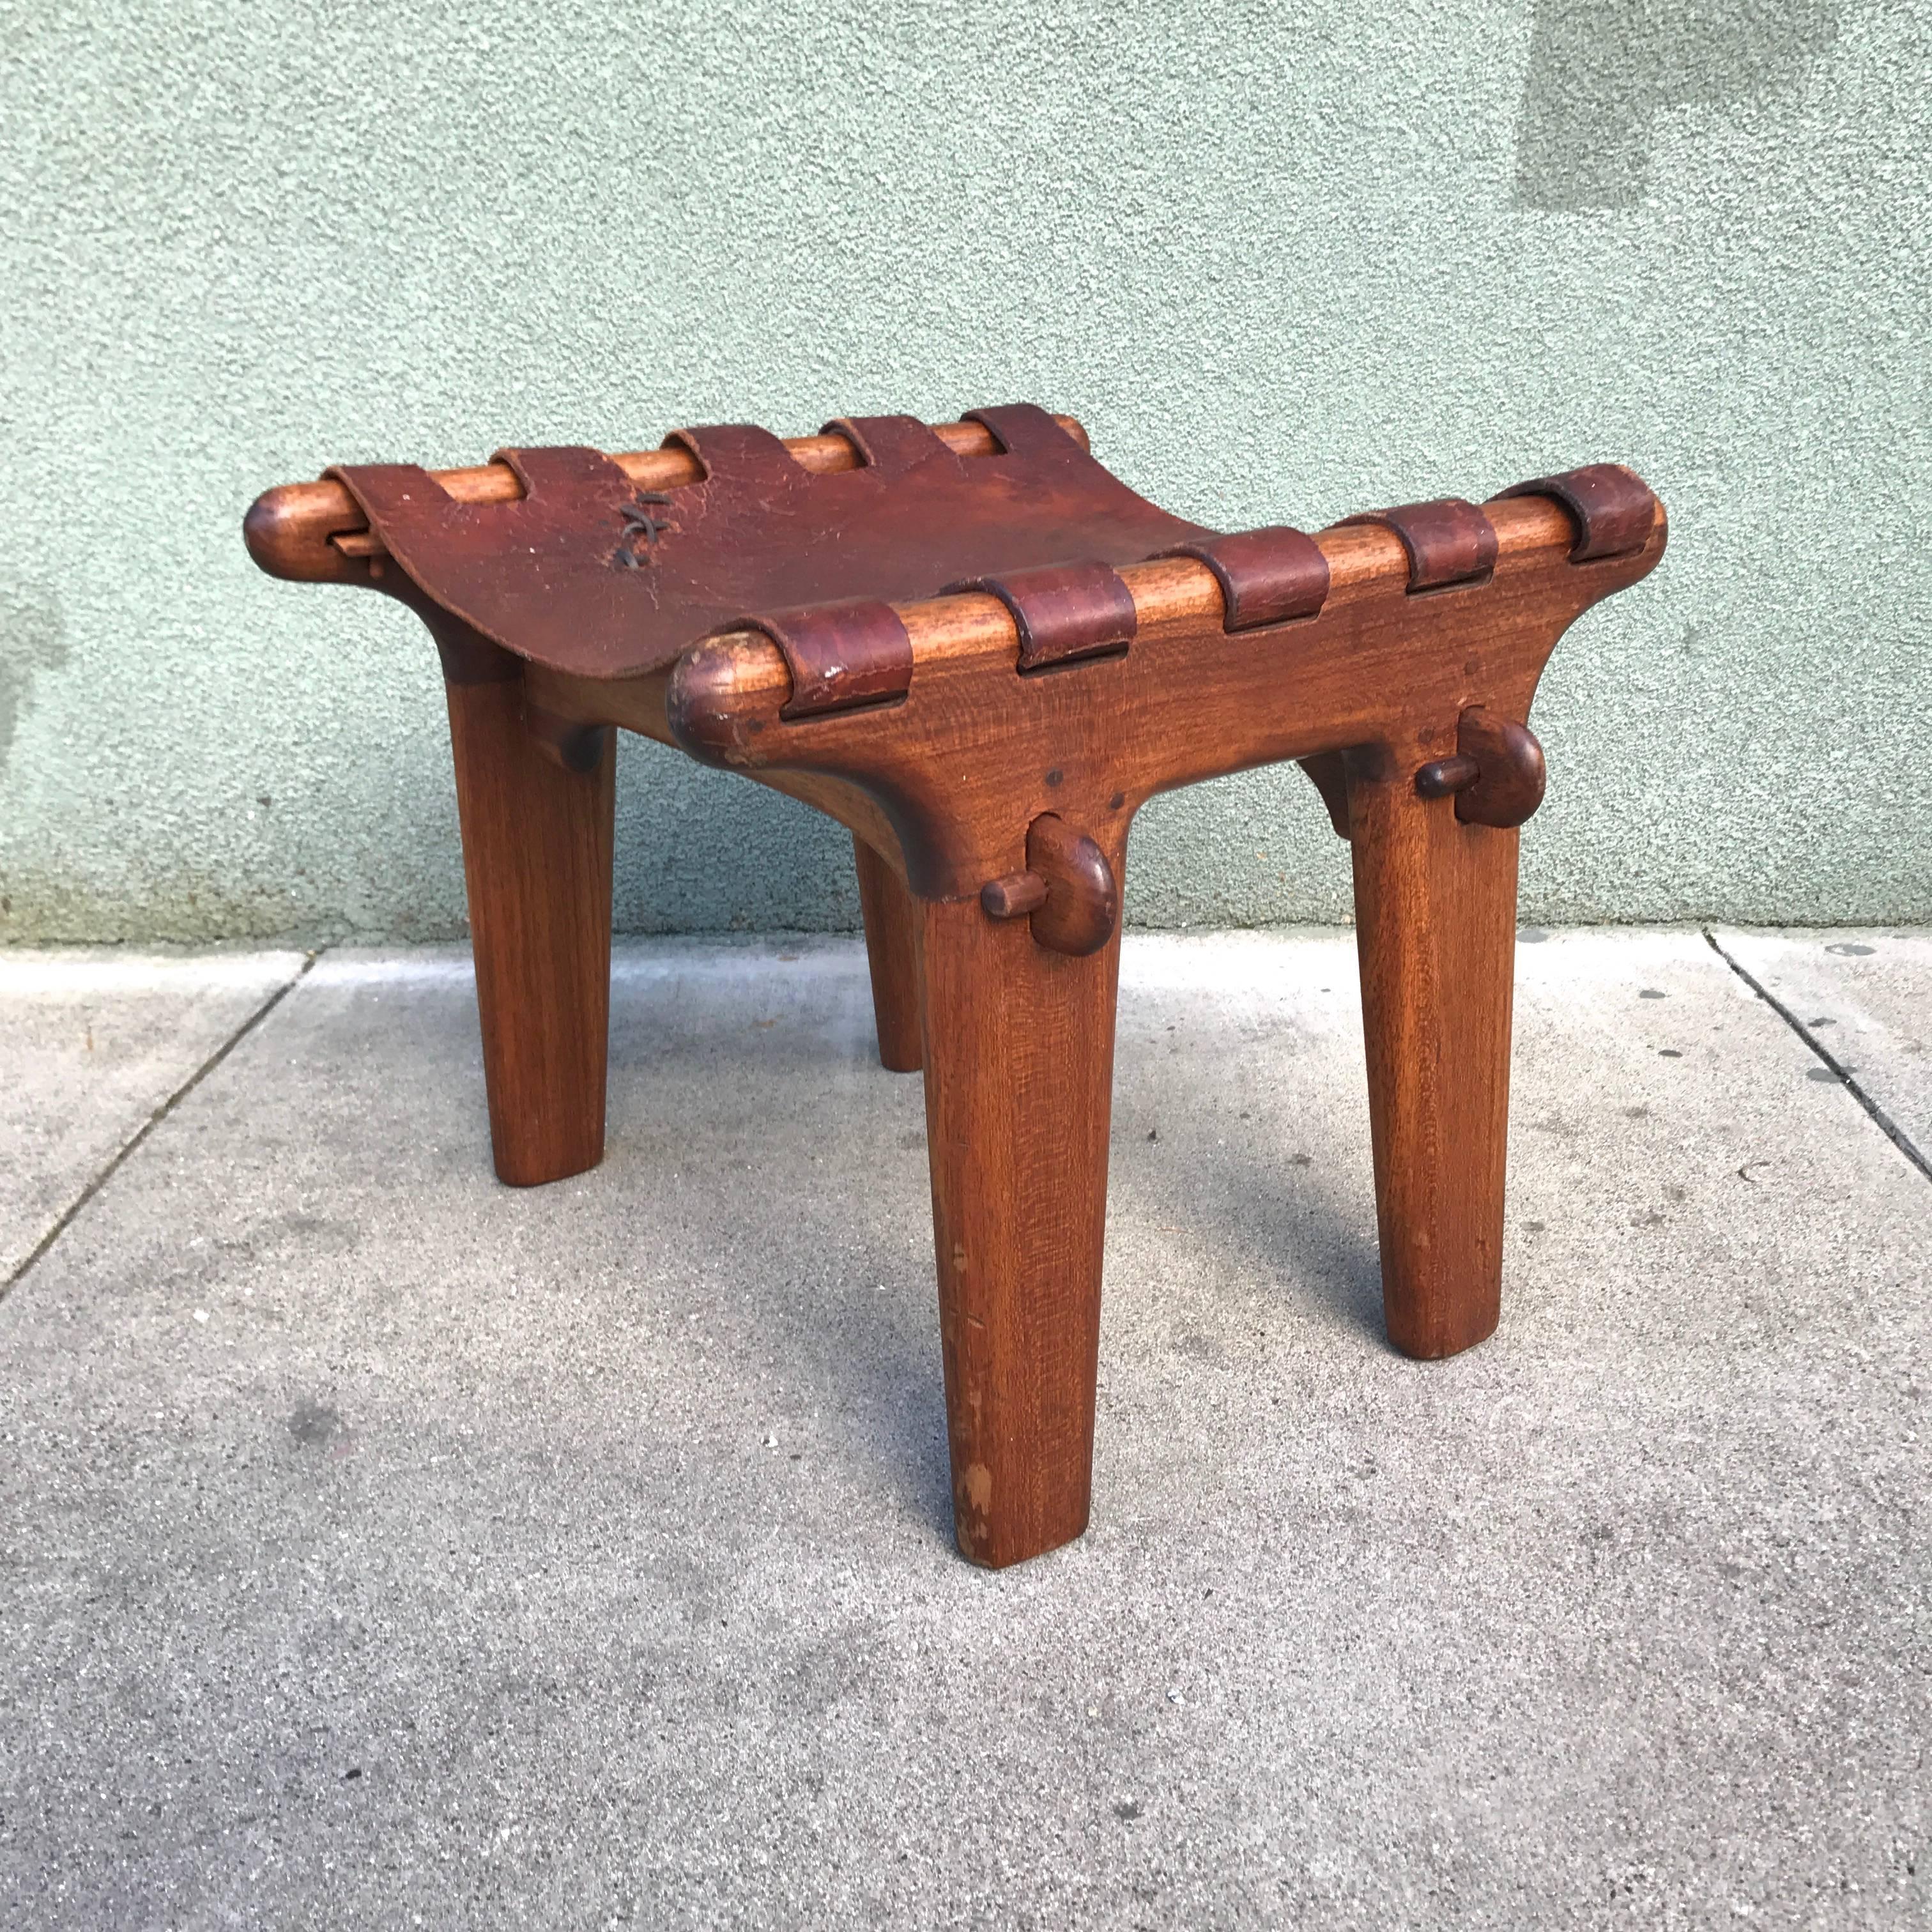 Rustic modern foot stool by Ecuadorian Angel Pazmino for Muebbles de Estillo. Constructed from mahogany and leather using peg construction for the joinery and a leather sling cover attached via wooden pegs. All original condition with age